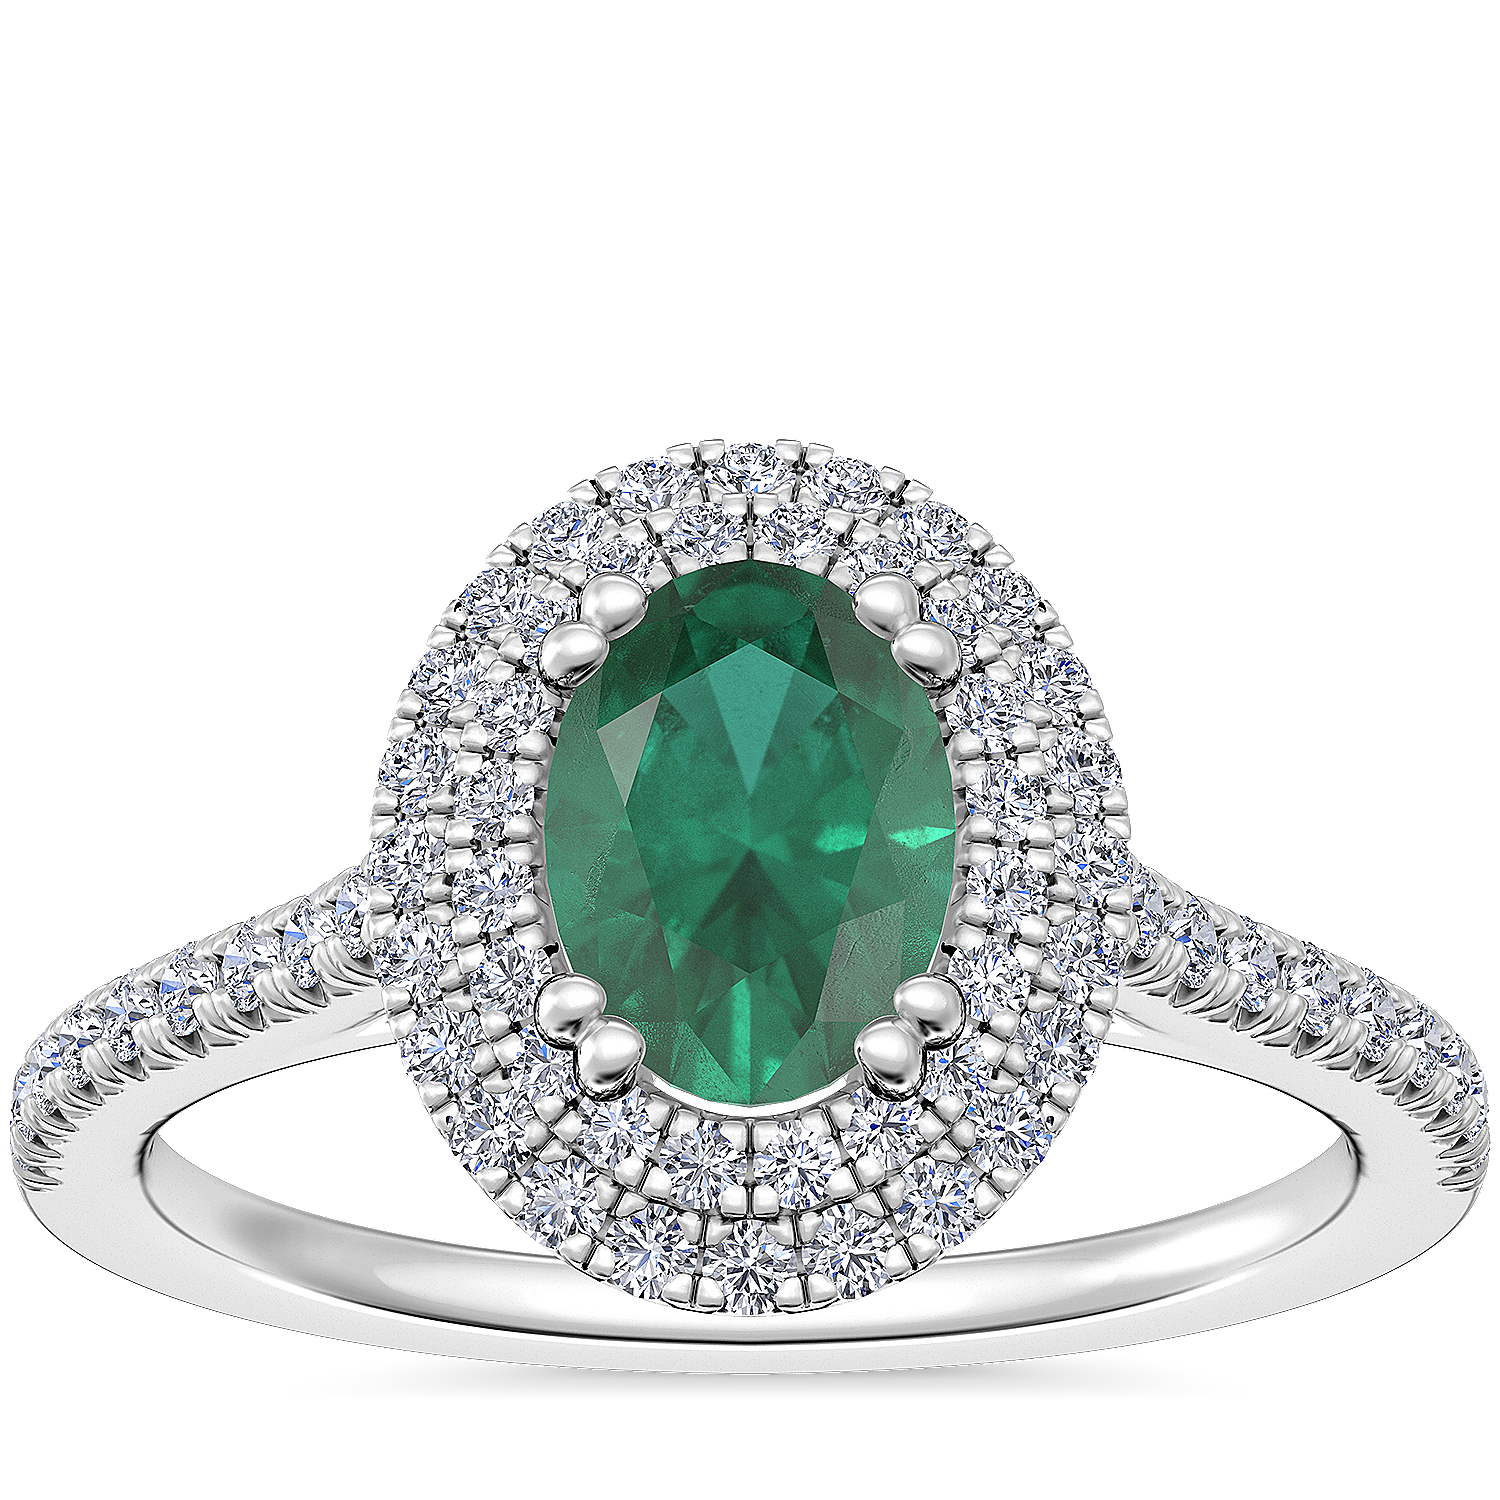 Micropave Double Halo Diamond Engagement Ring with Oval Emerald in Platinum (7x5mm)